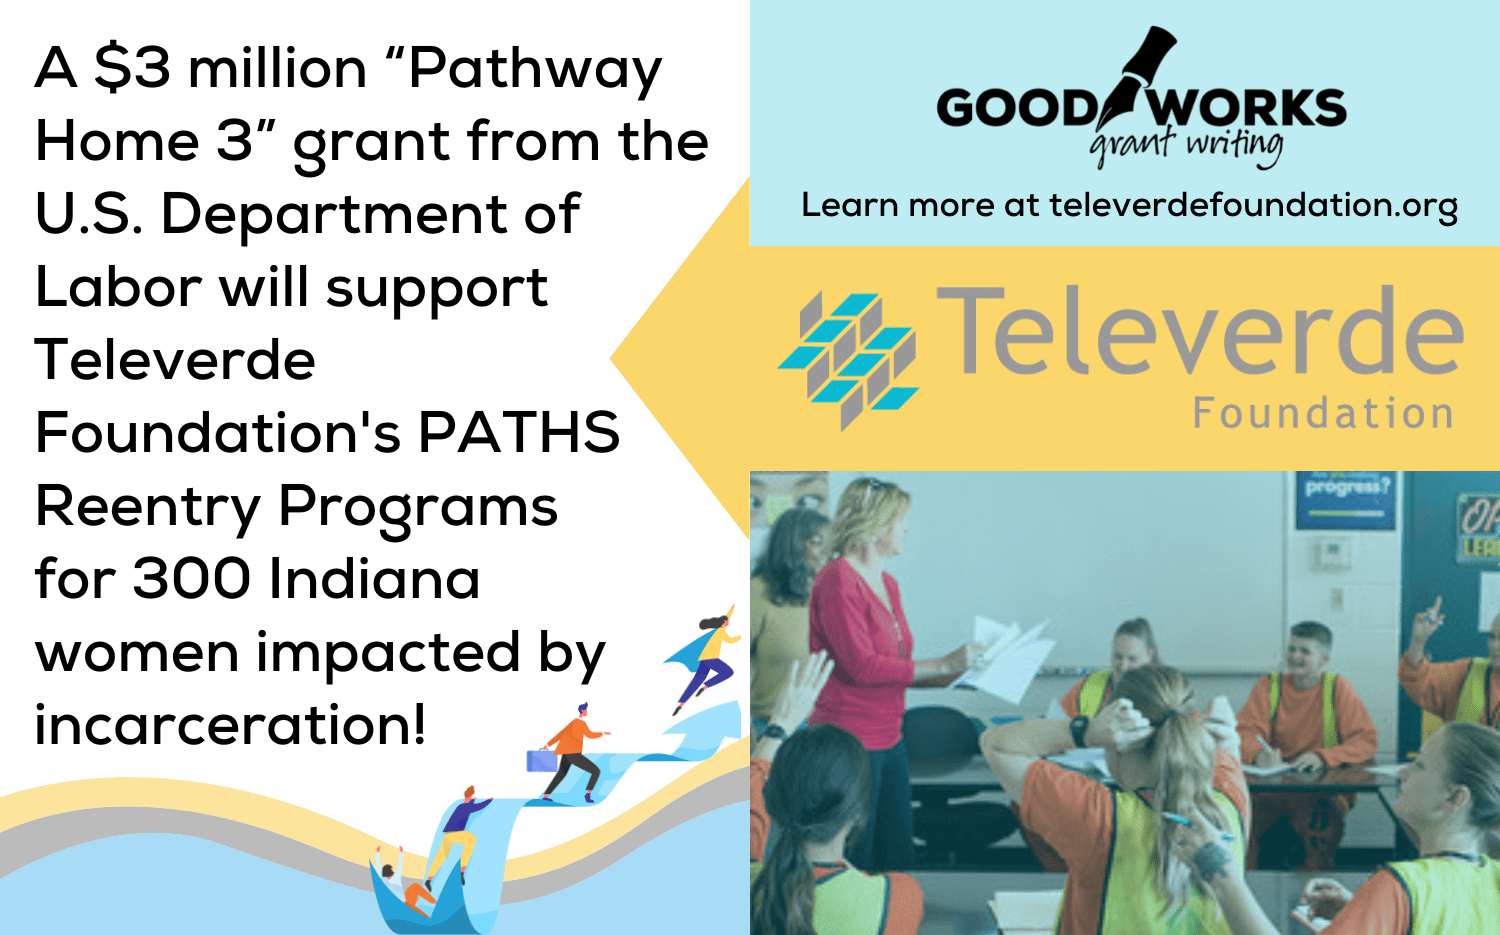 Televerde Foundation’s PATHS Reentry Programs for Indiana Women